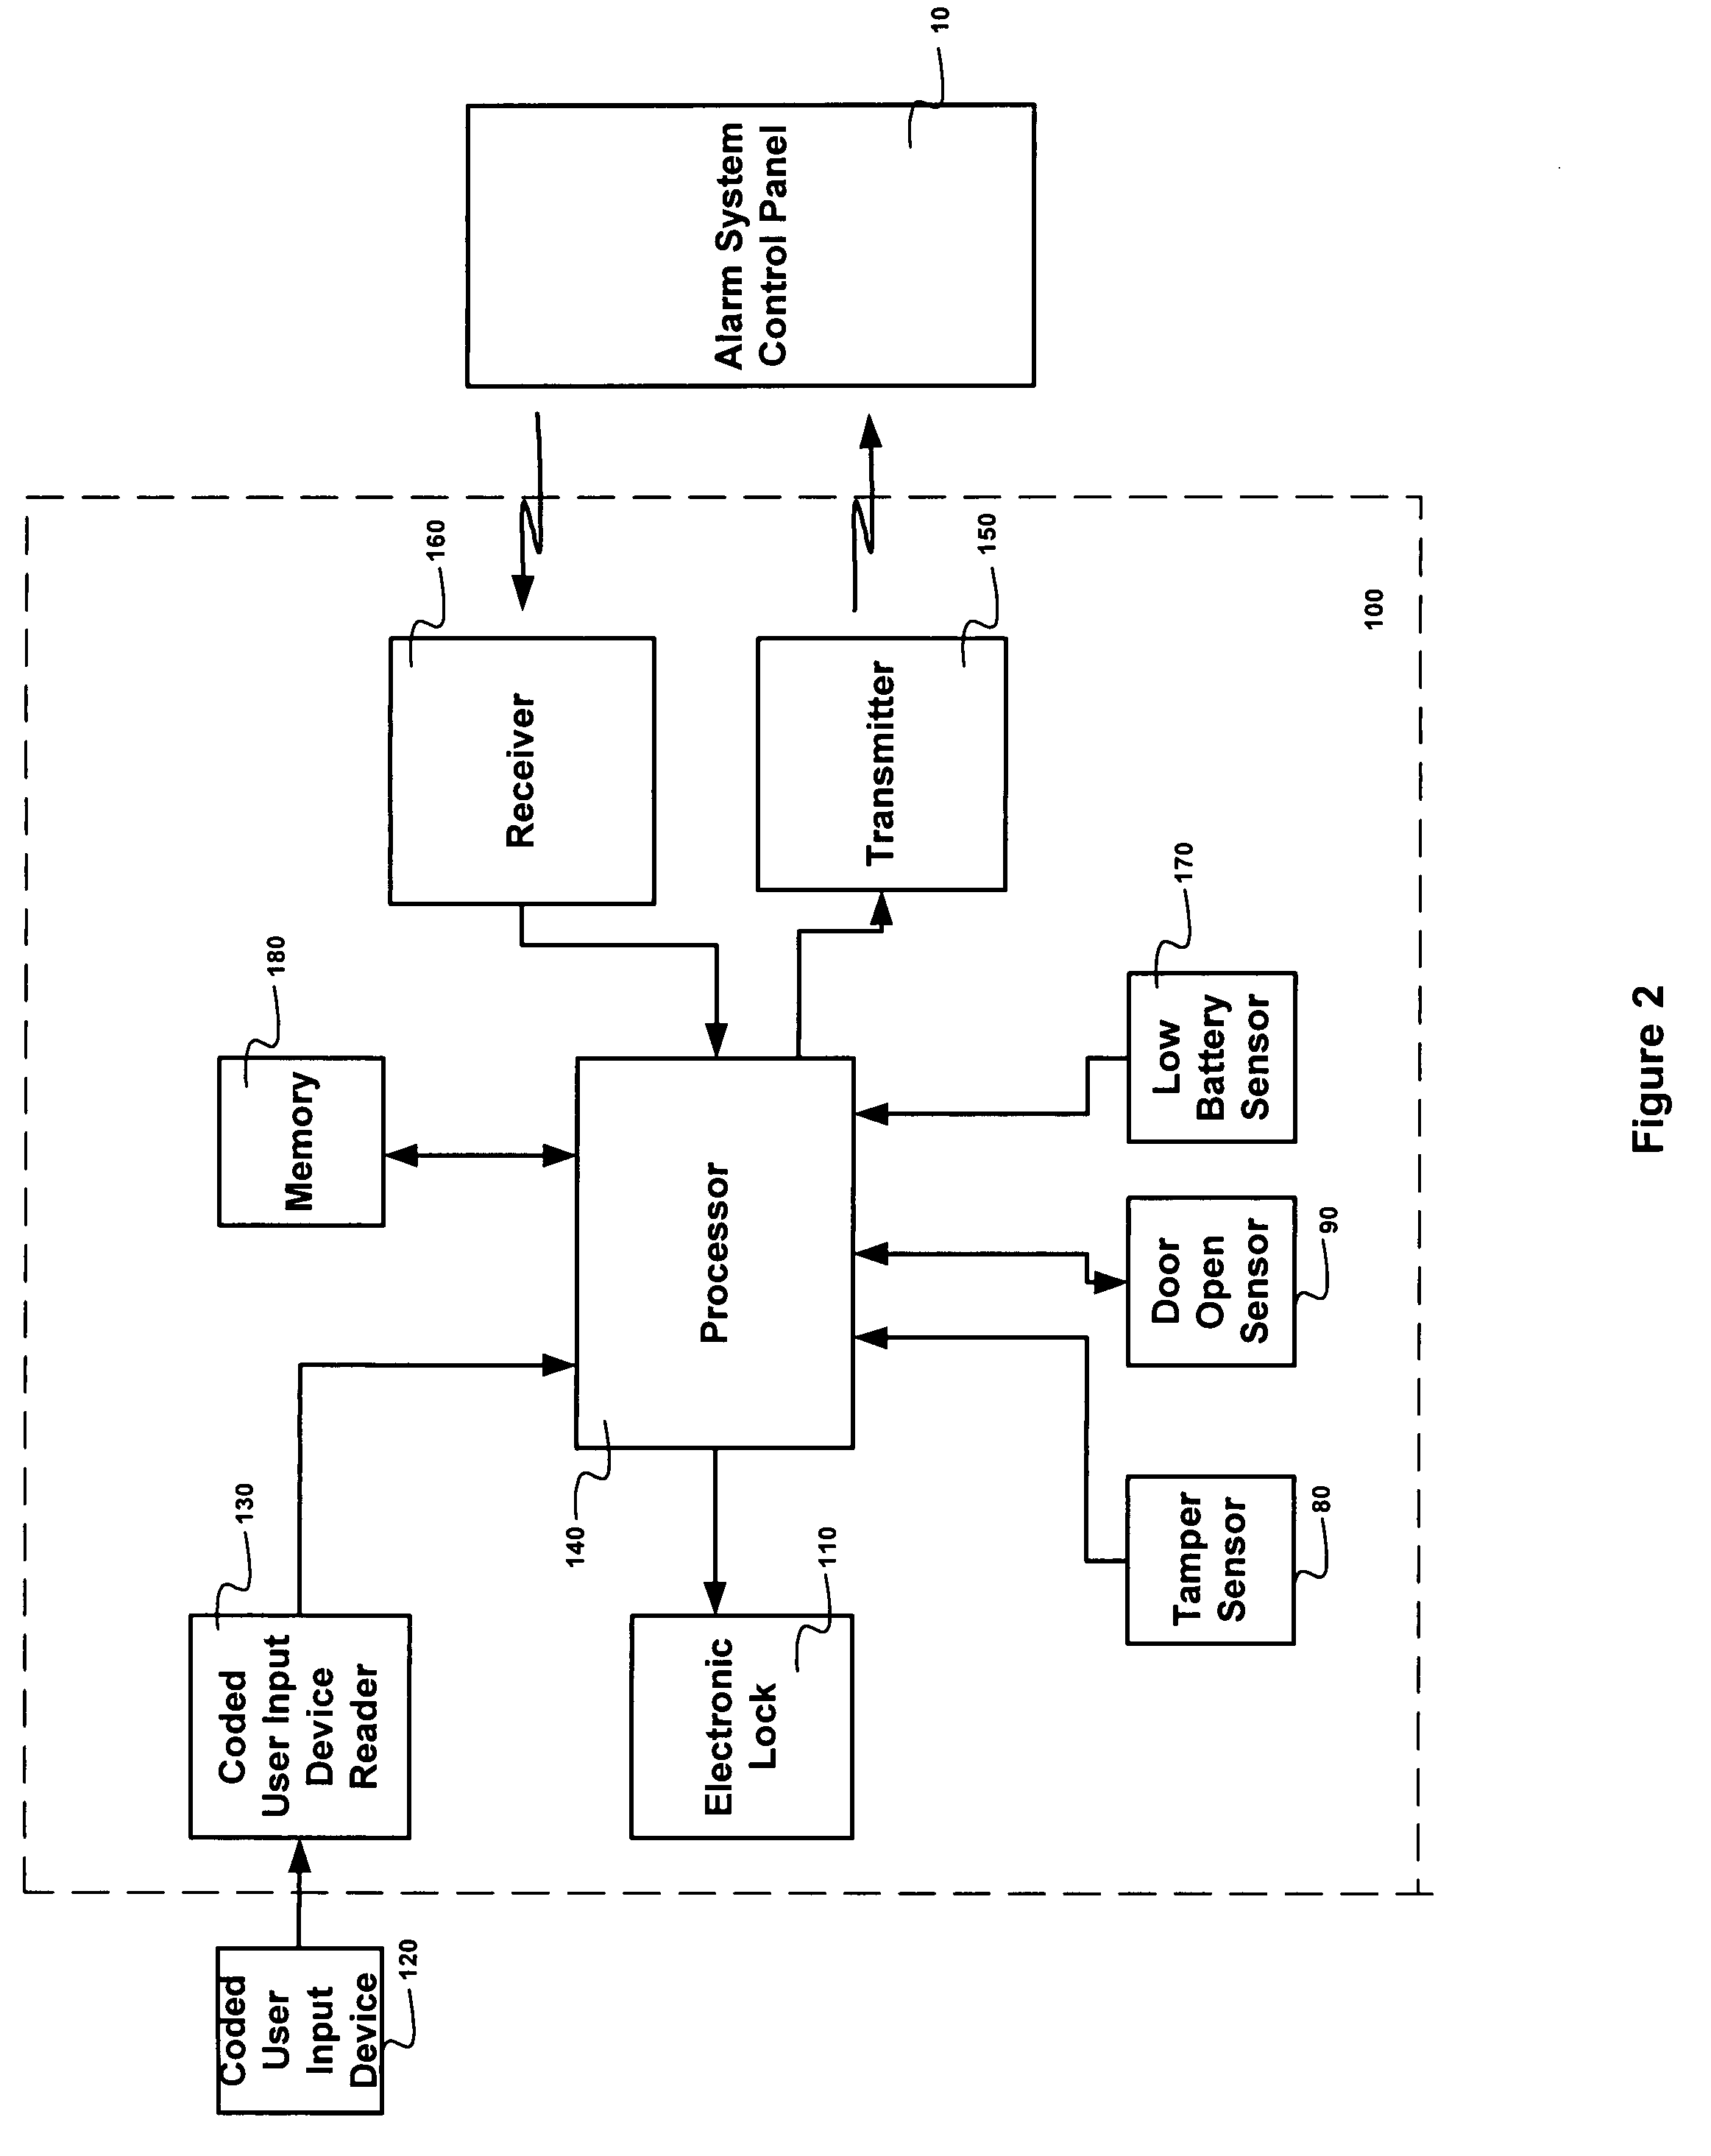 Door entry security device with electronic lock